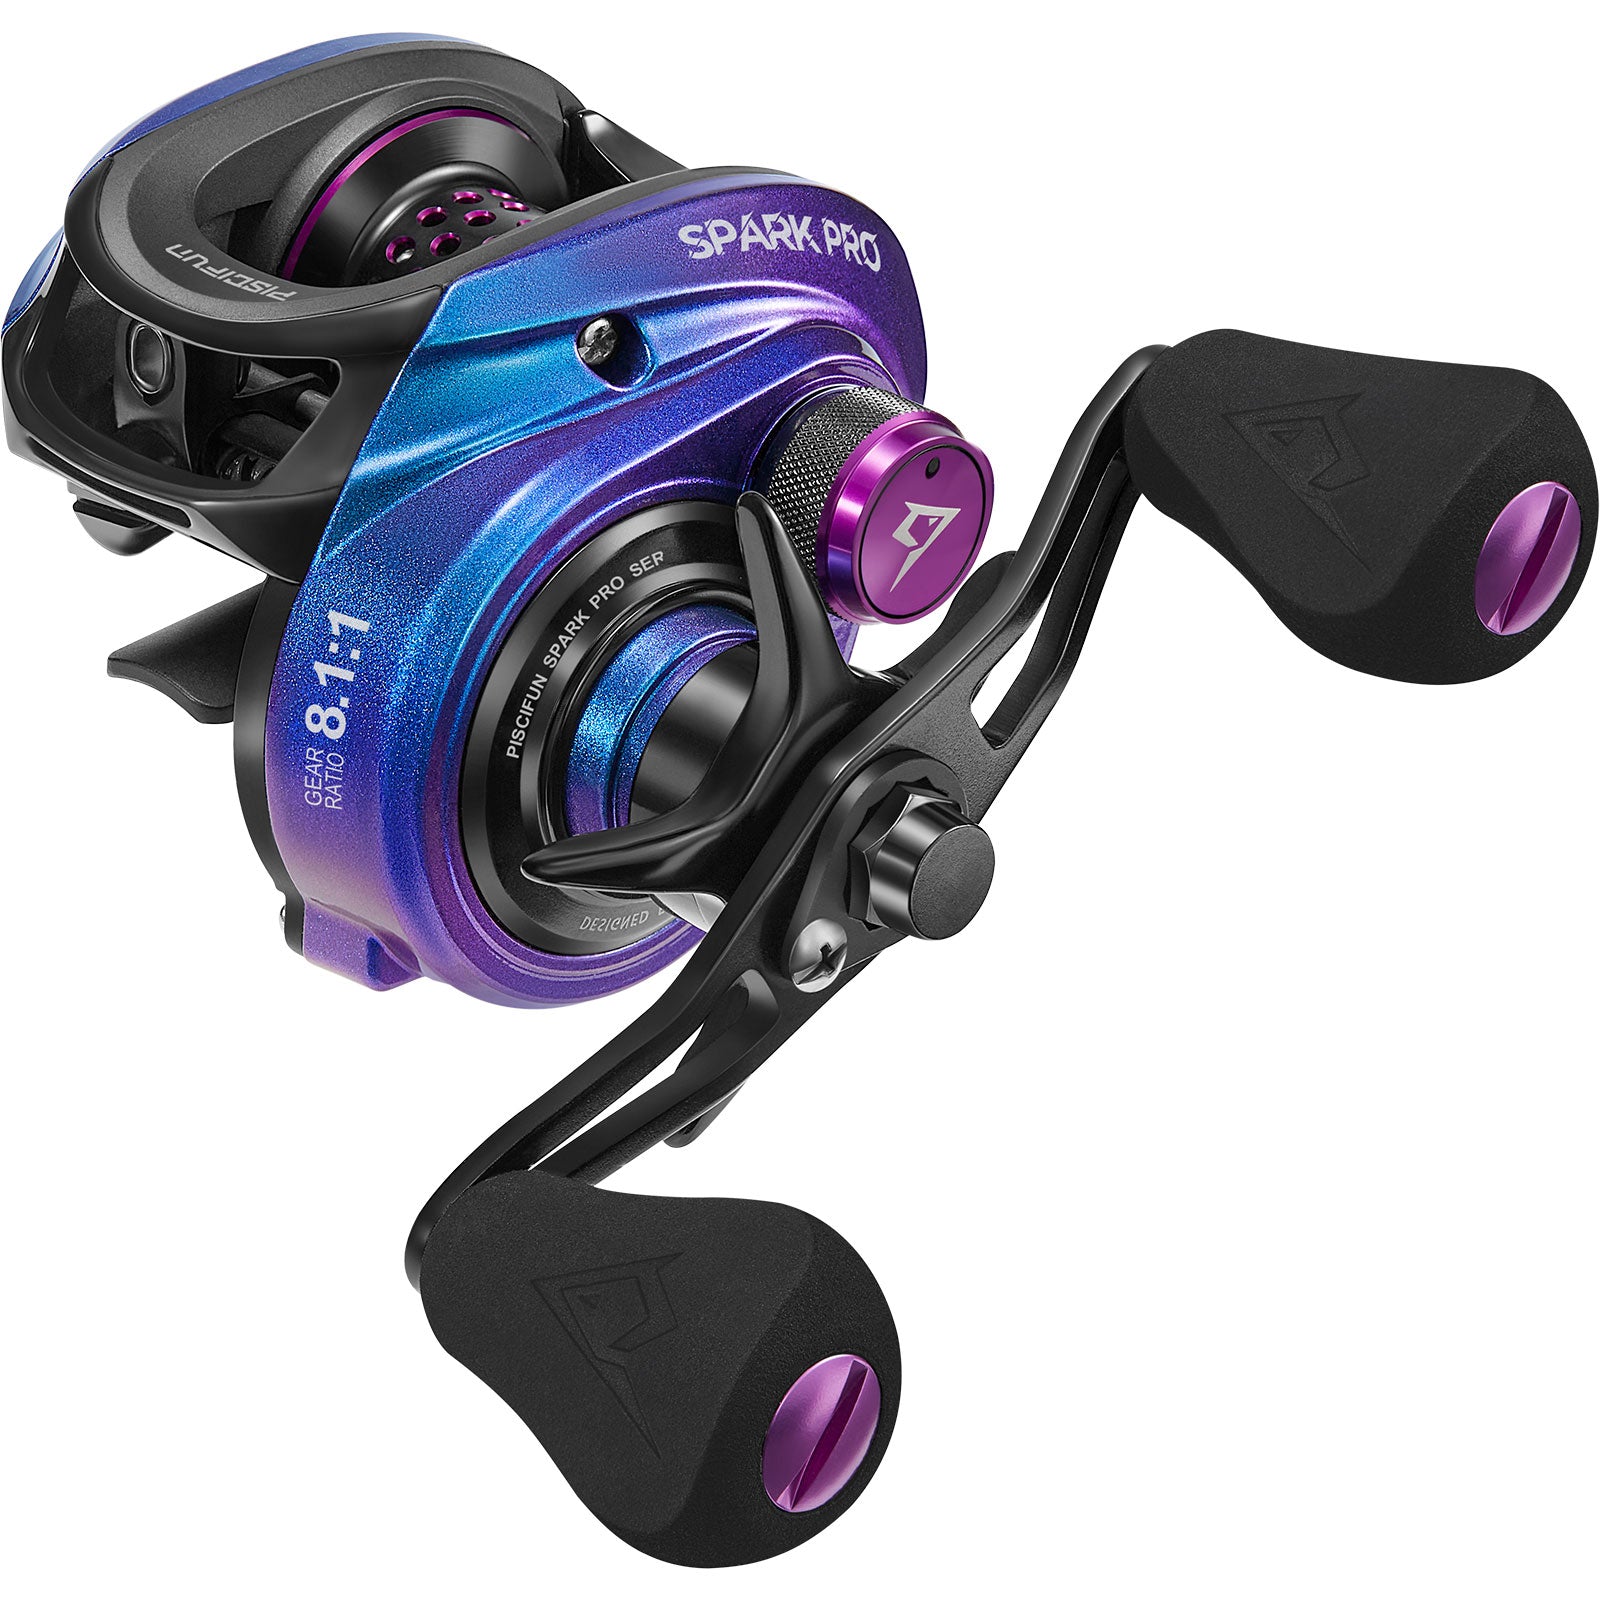 Cheap Baitcasting Reels Carbon Drag 5.5 Kg Magnetic Systems